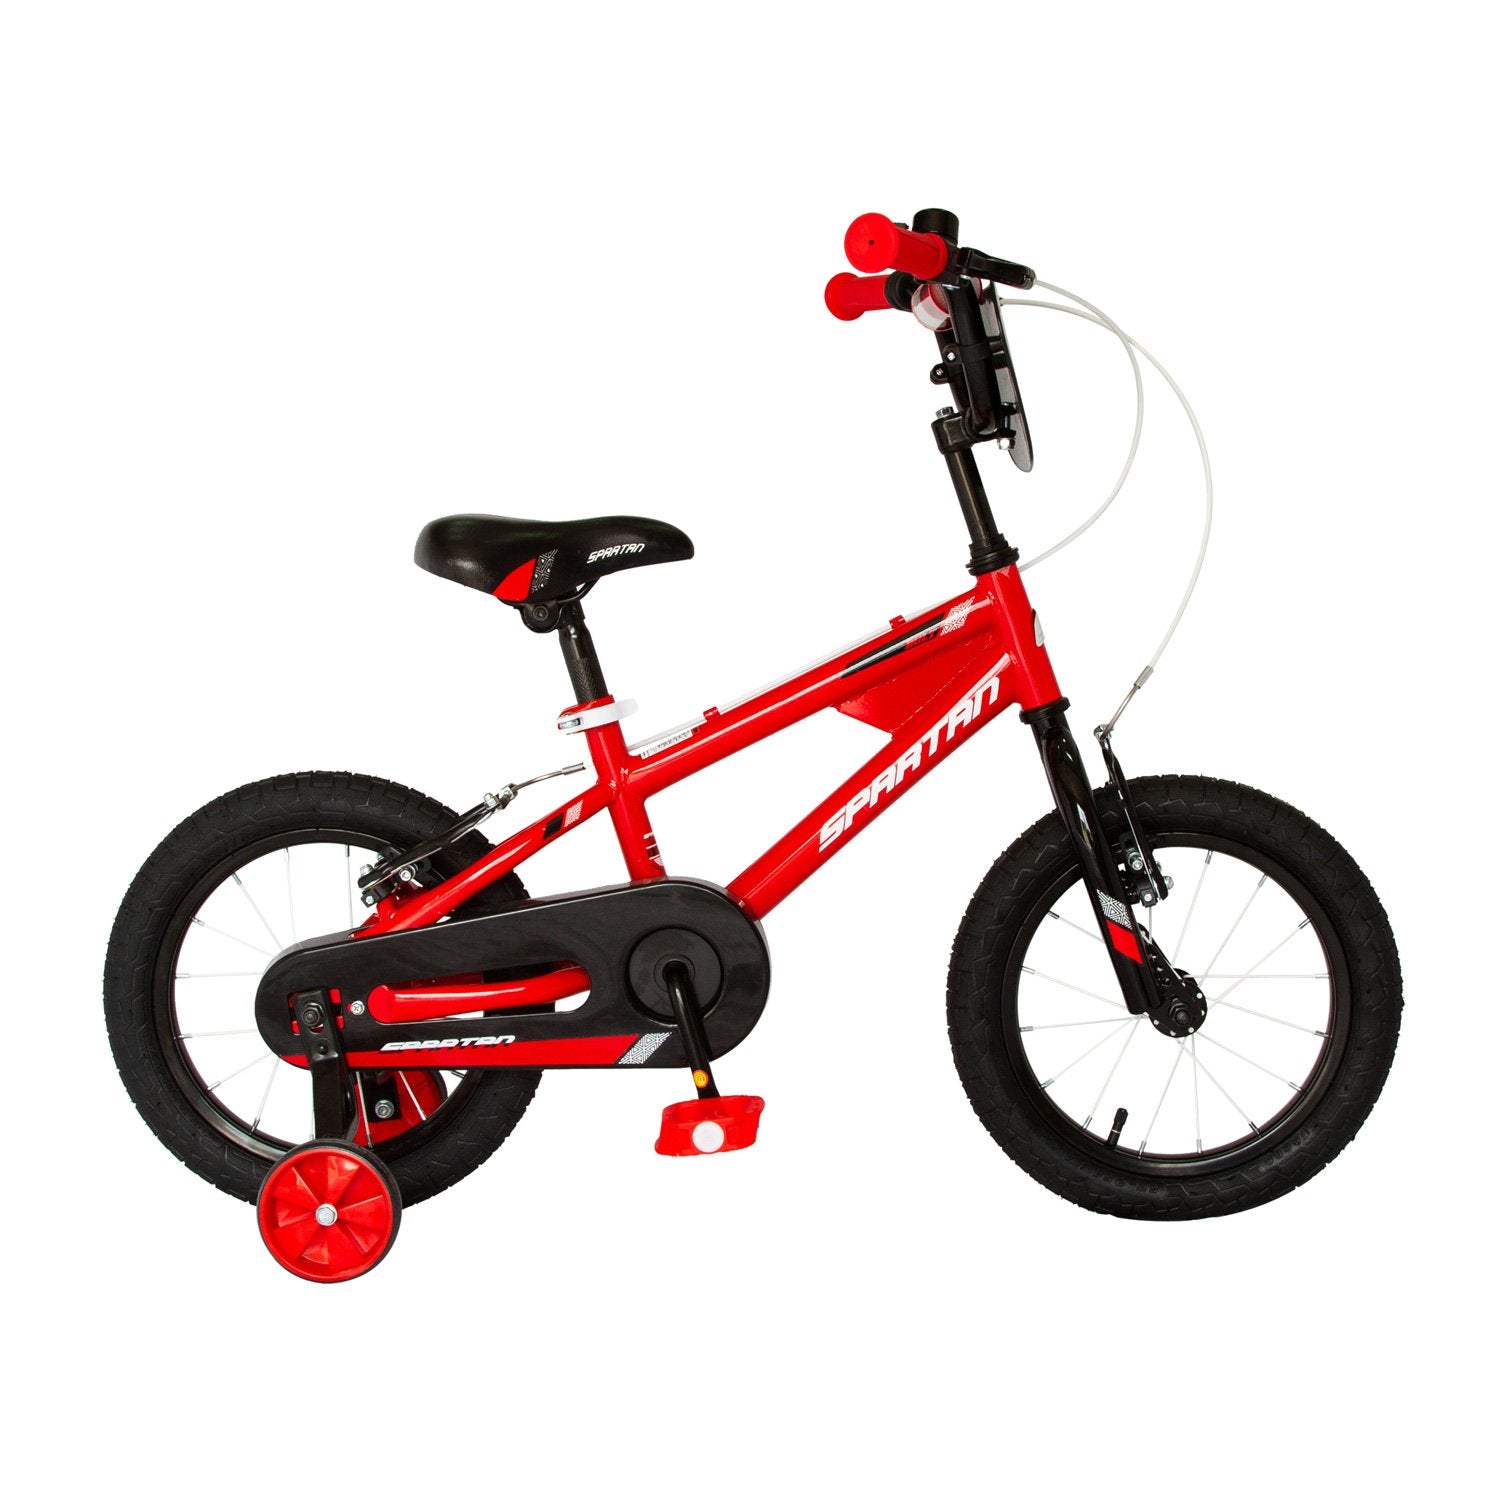 Spartan 12" Bolt Bicycle Red